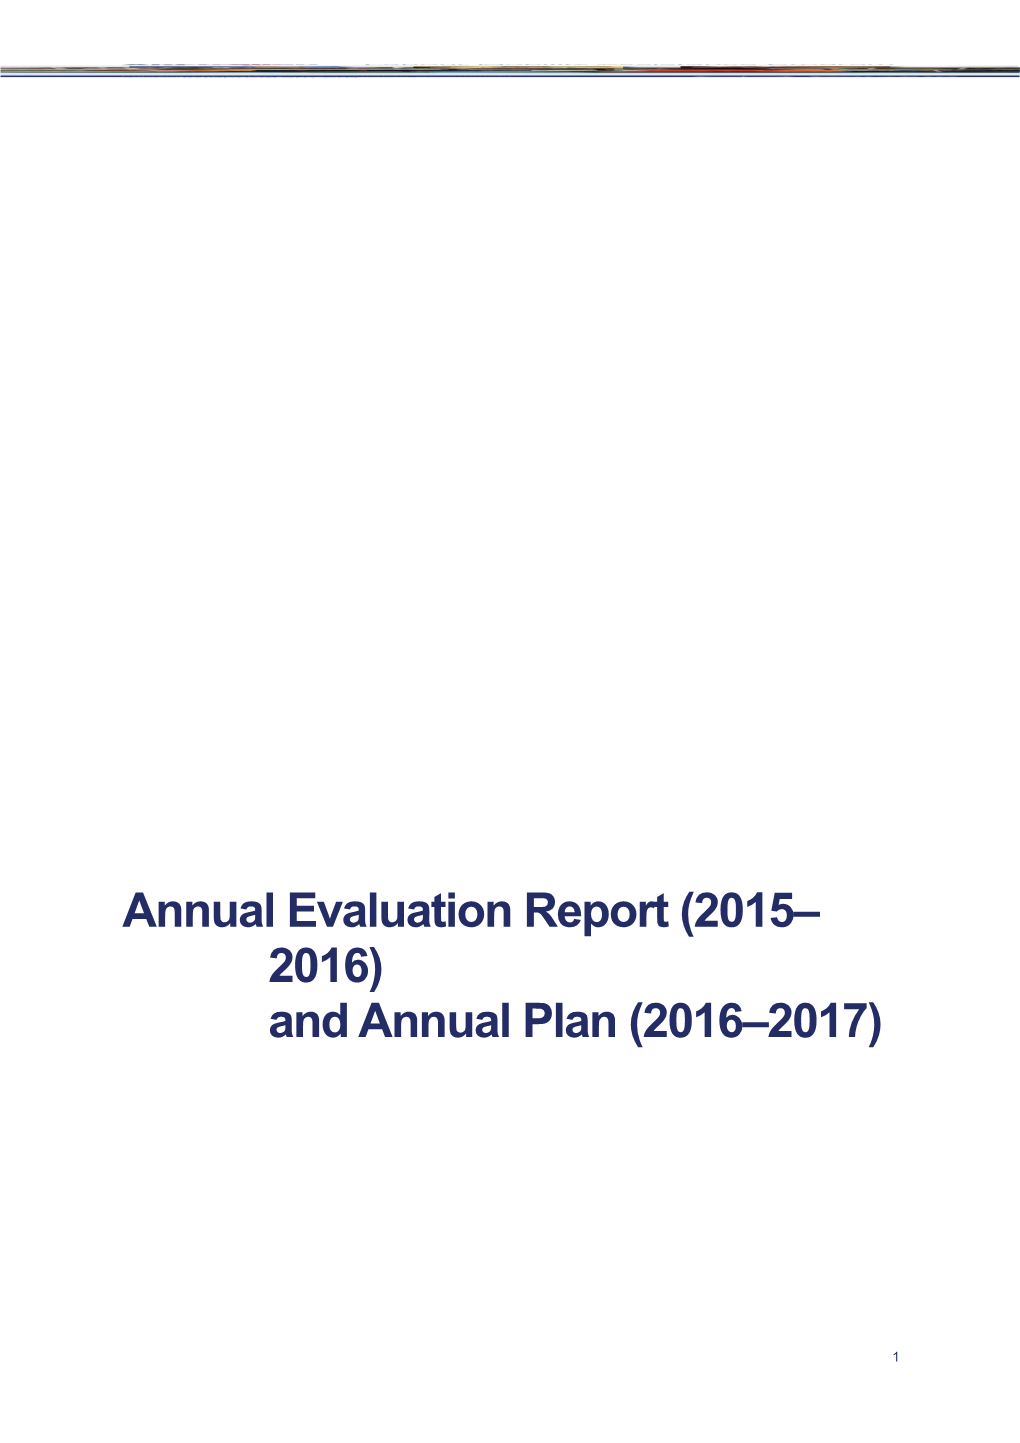 Labour Mobility Assistance Program: Annual Evaluation Report (2015 to 2016) and Annual